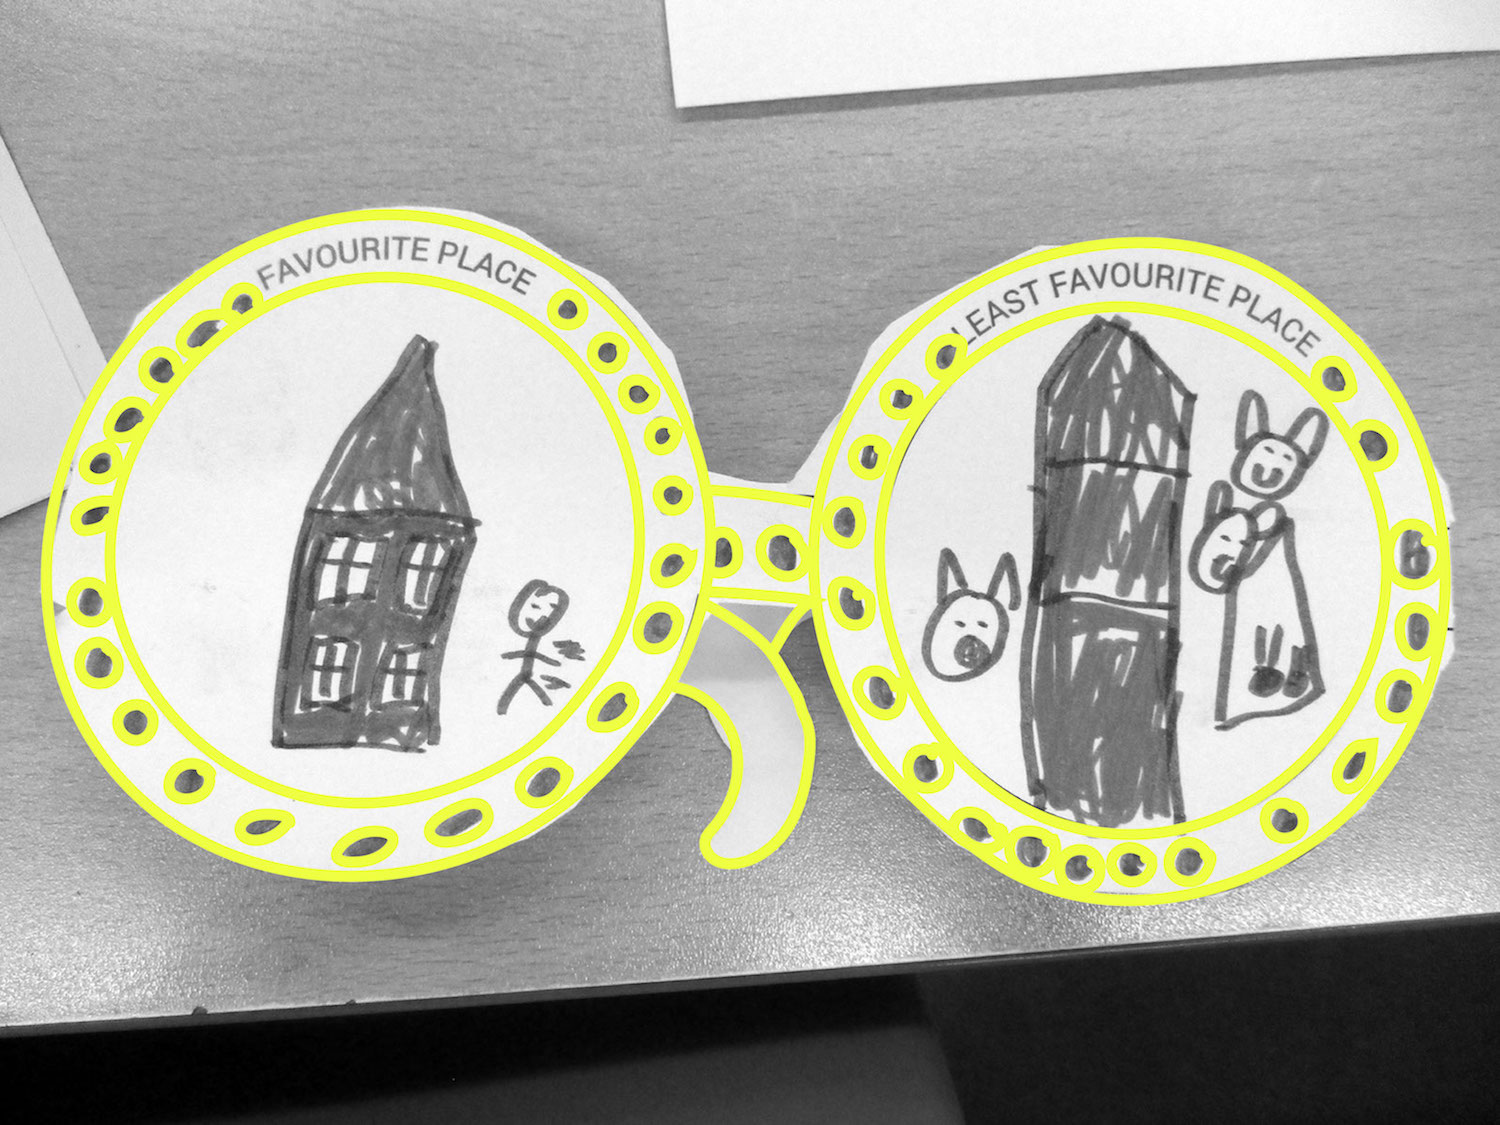 A pair of Empathy glasses made to of paper with a drawing on each lens, one is their favourite place and the other is their least favourite place. 